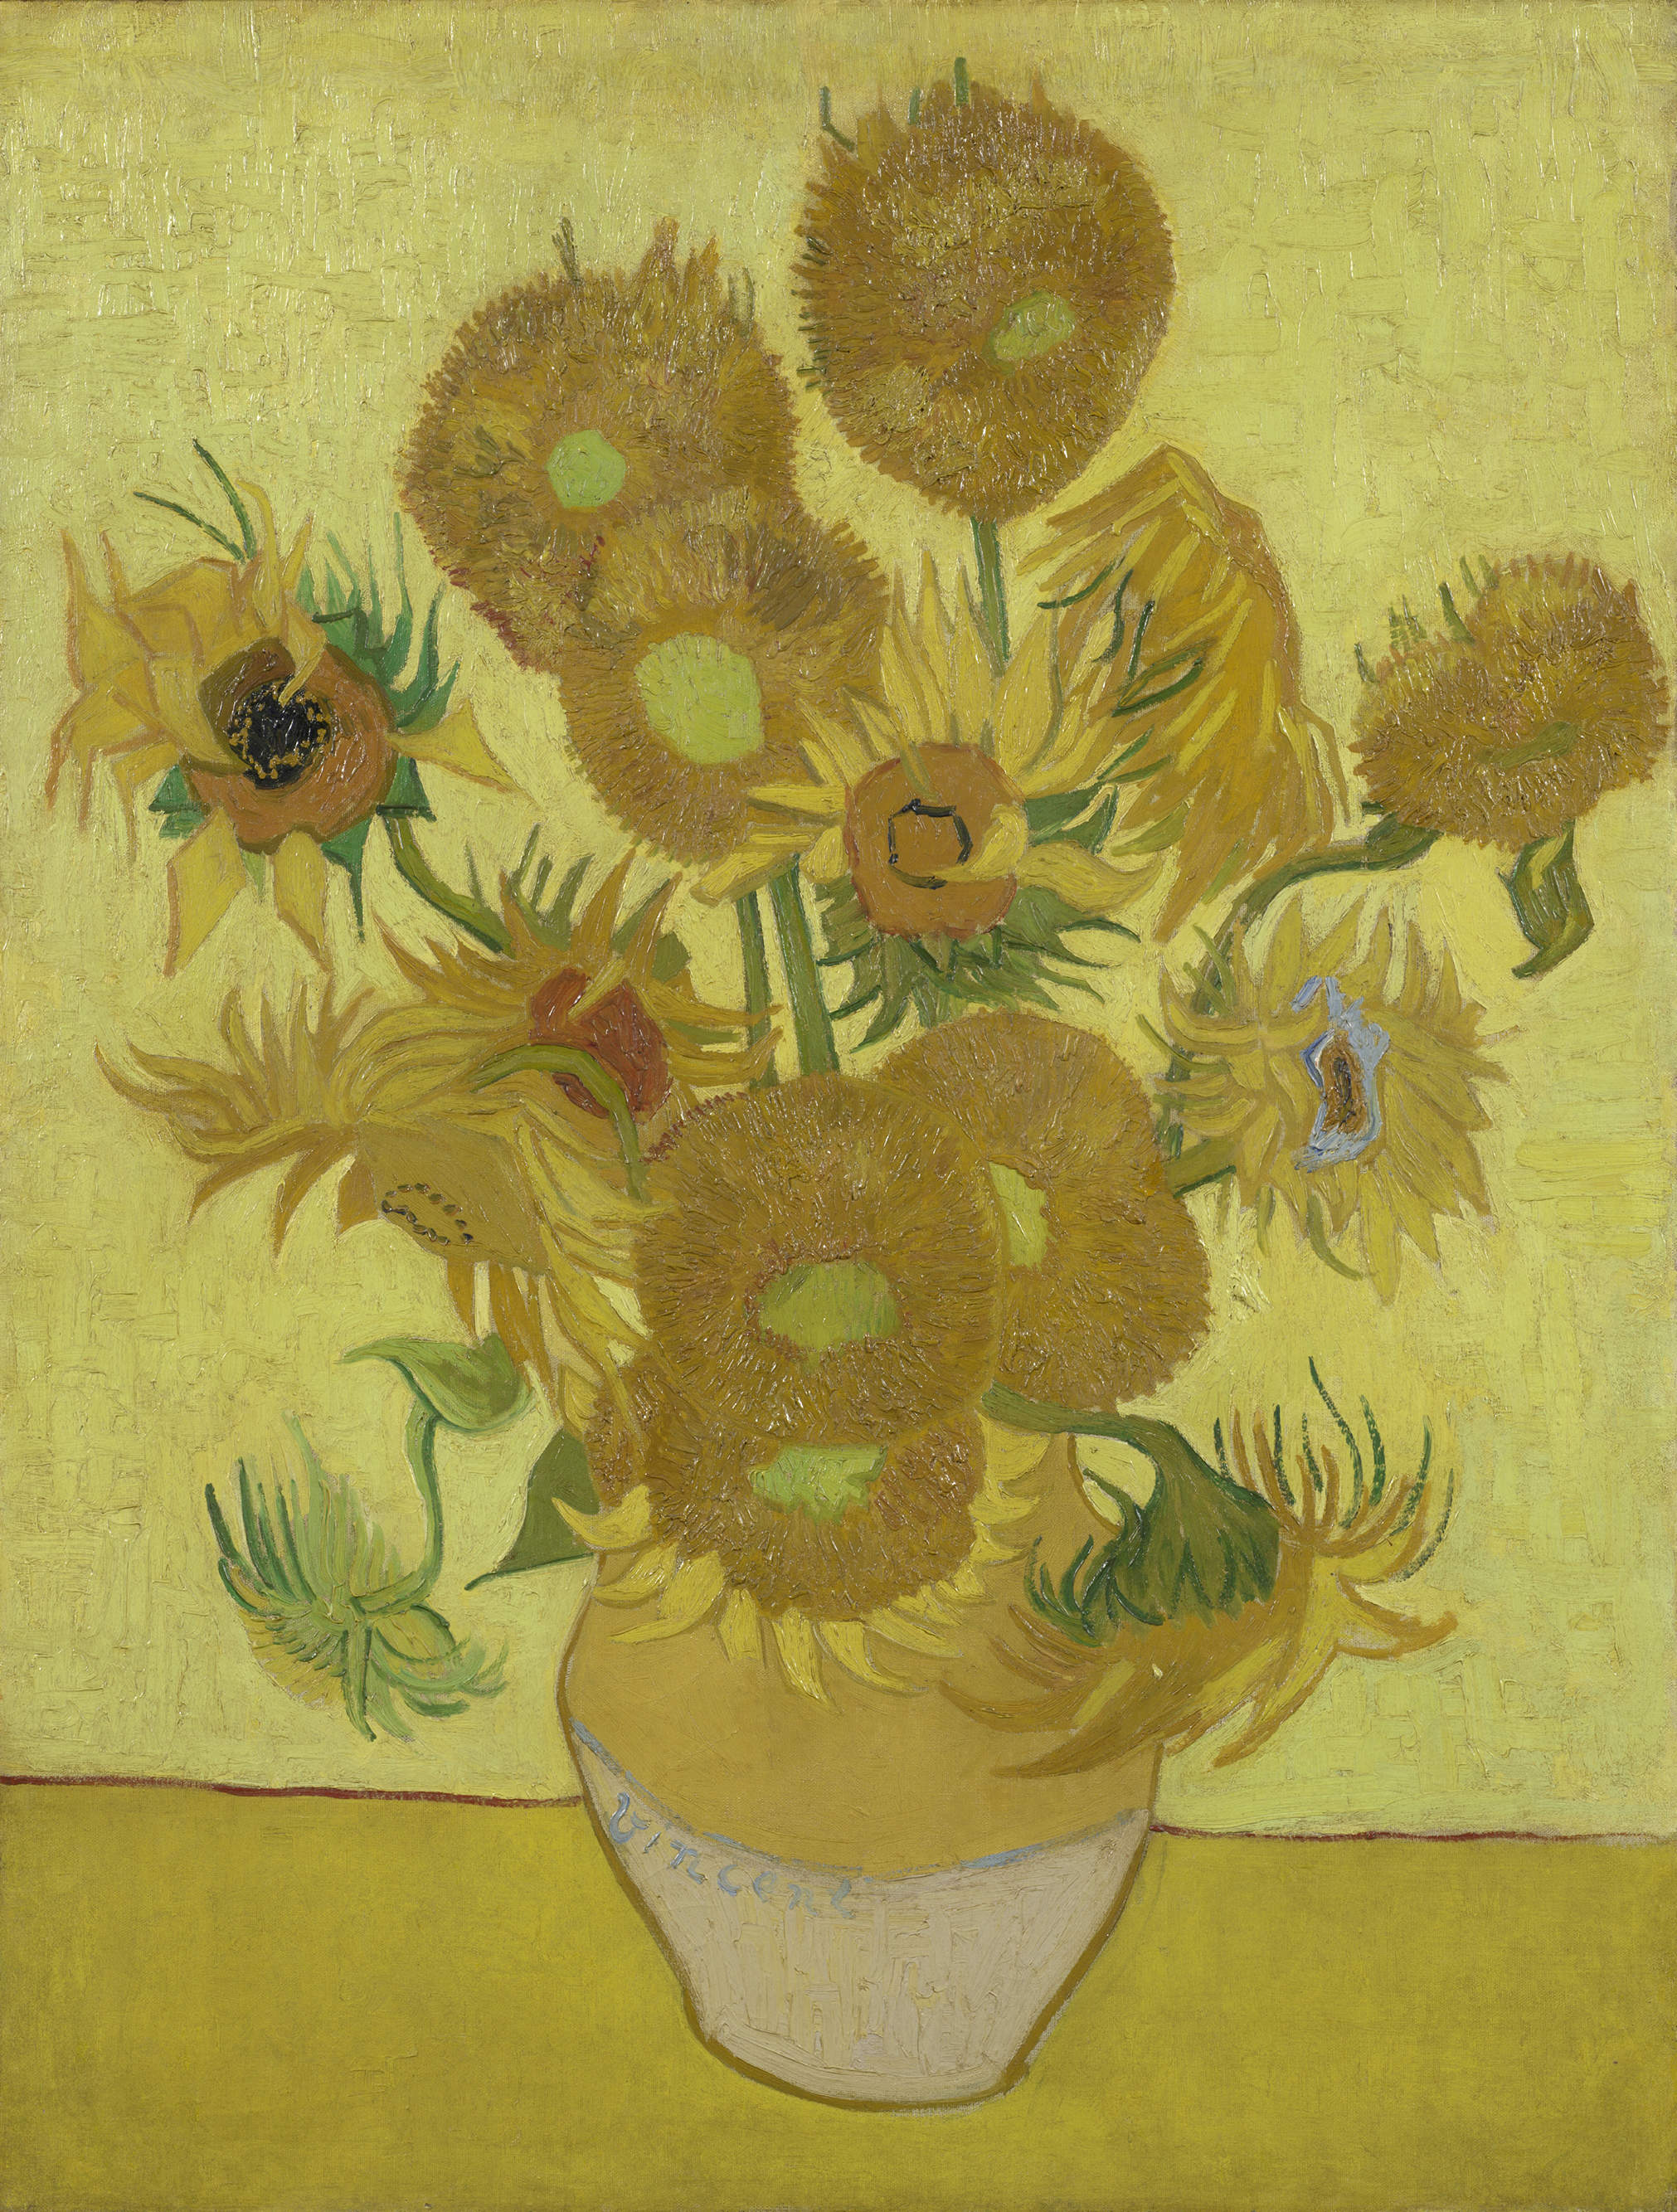 Van Gogh's Sunflowers, sold for $ 22.5 million in 1987, is it a fake?